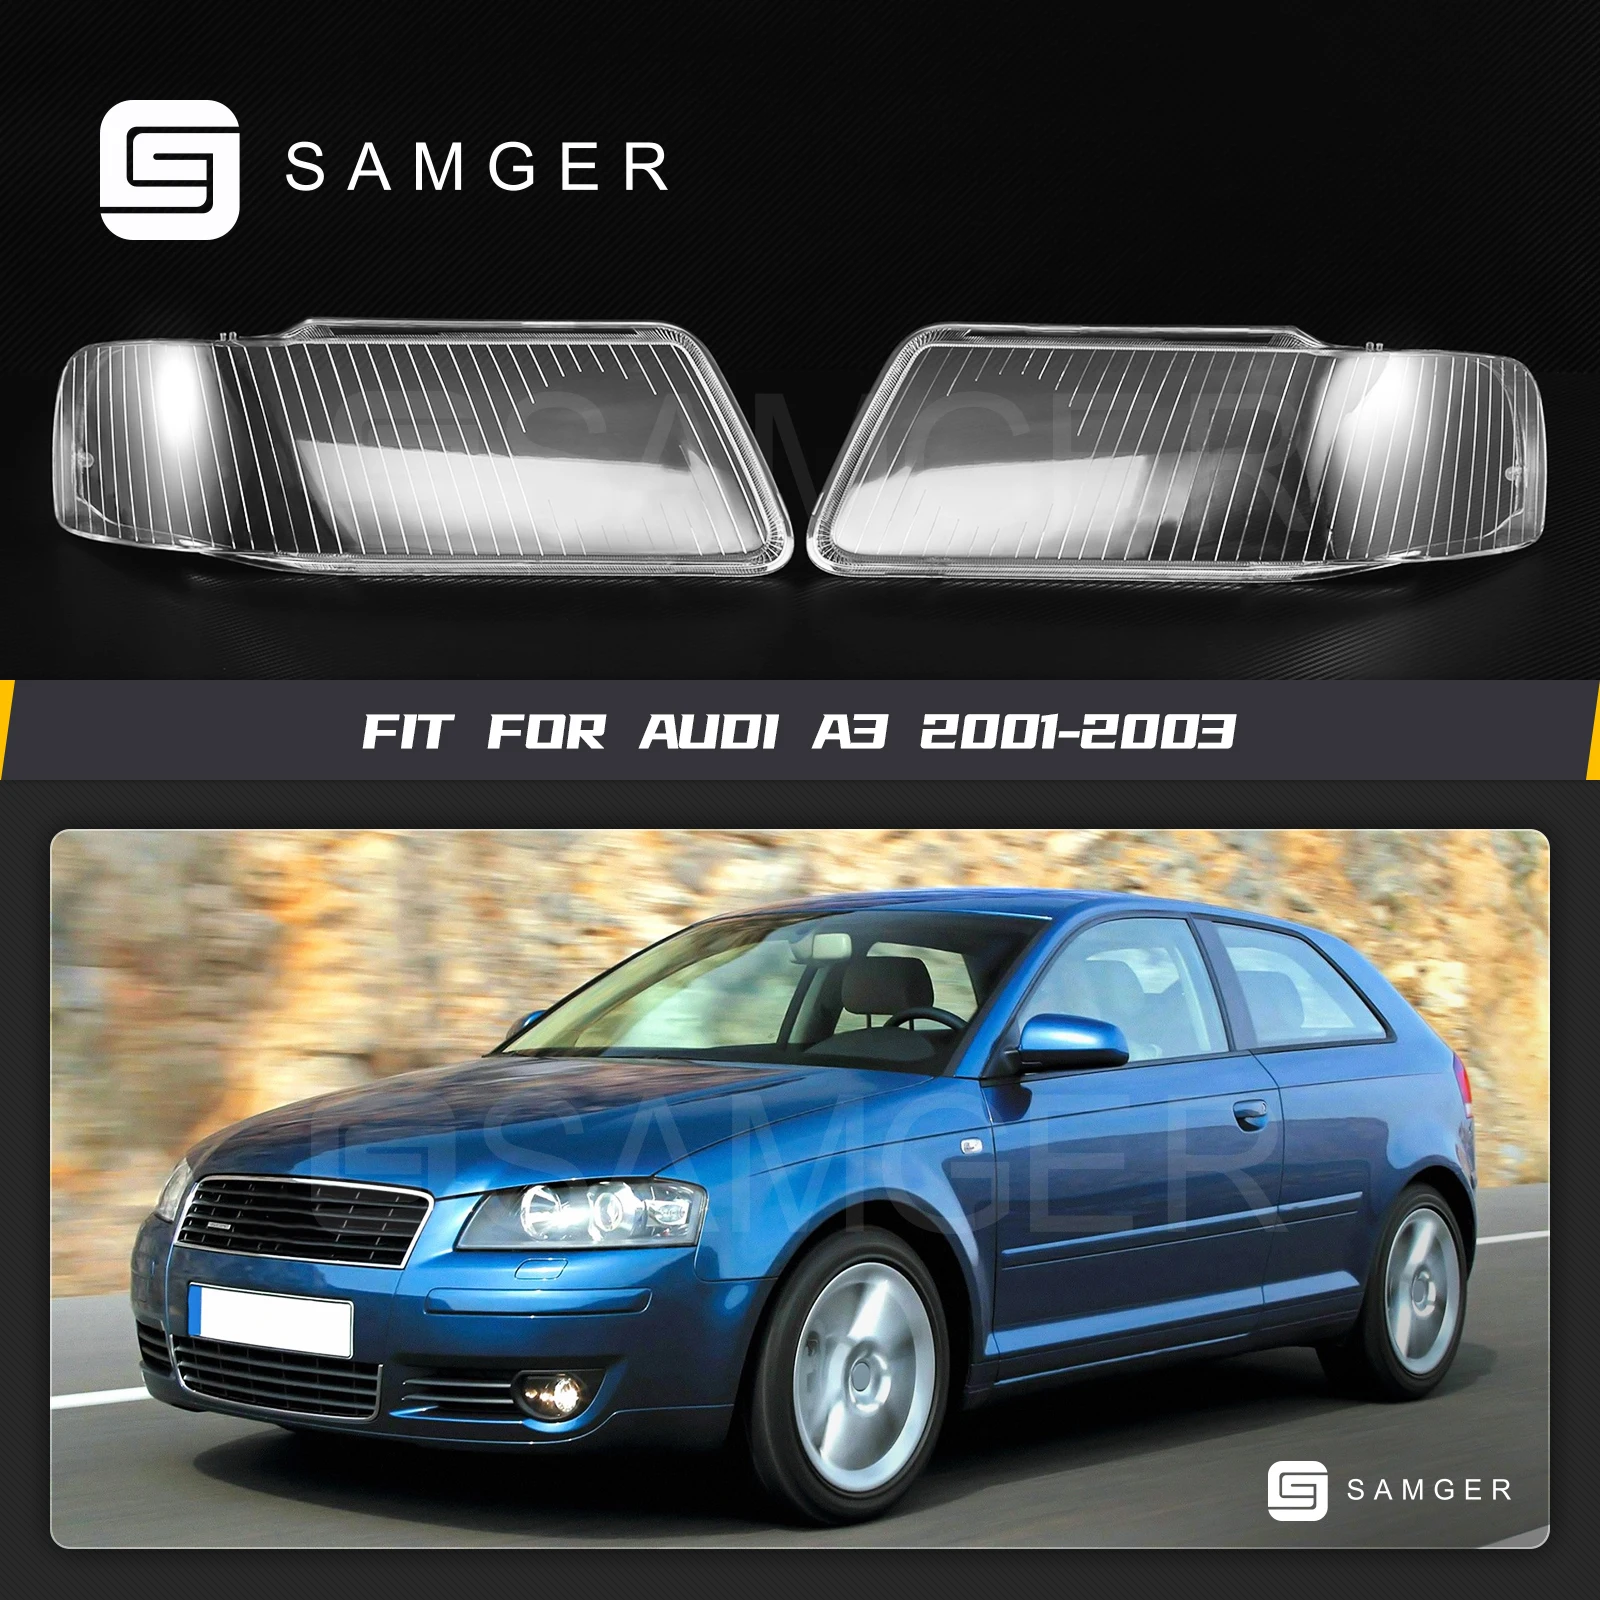 Samger 1Pair Headlight Cover Headlamp Shell Lens Lampshade Transparent For Audi A3 2001-2003 Car Light Protection Cover Shell